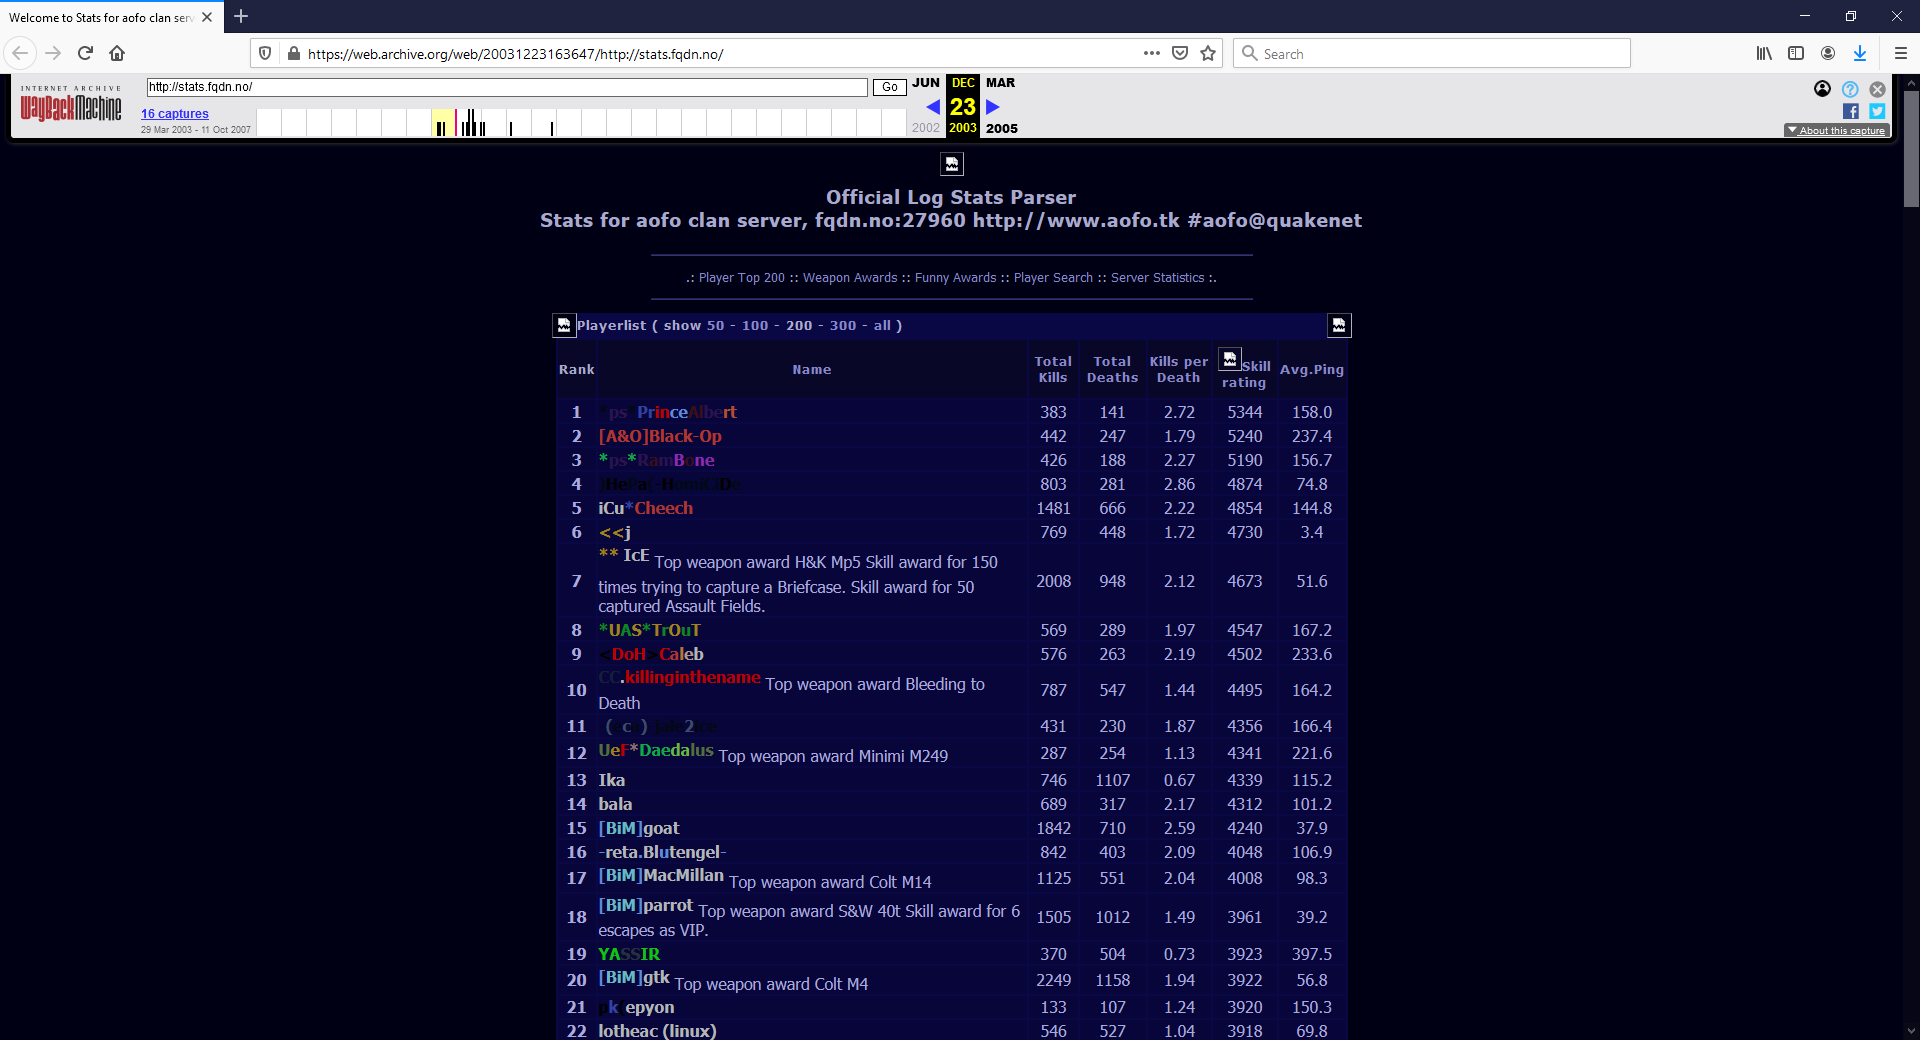 main page with data